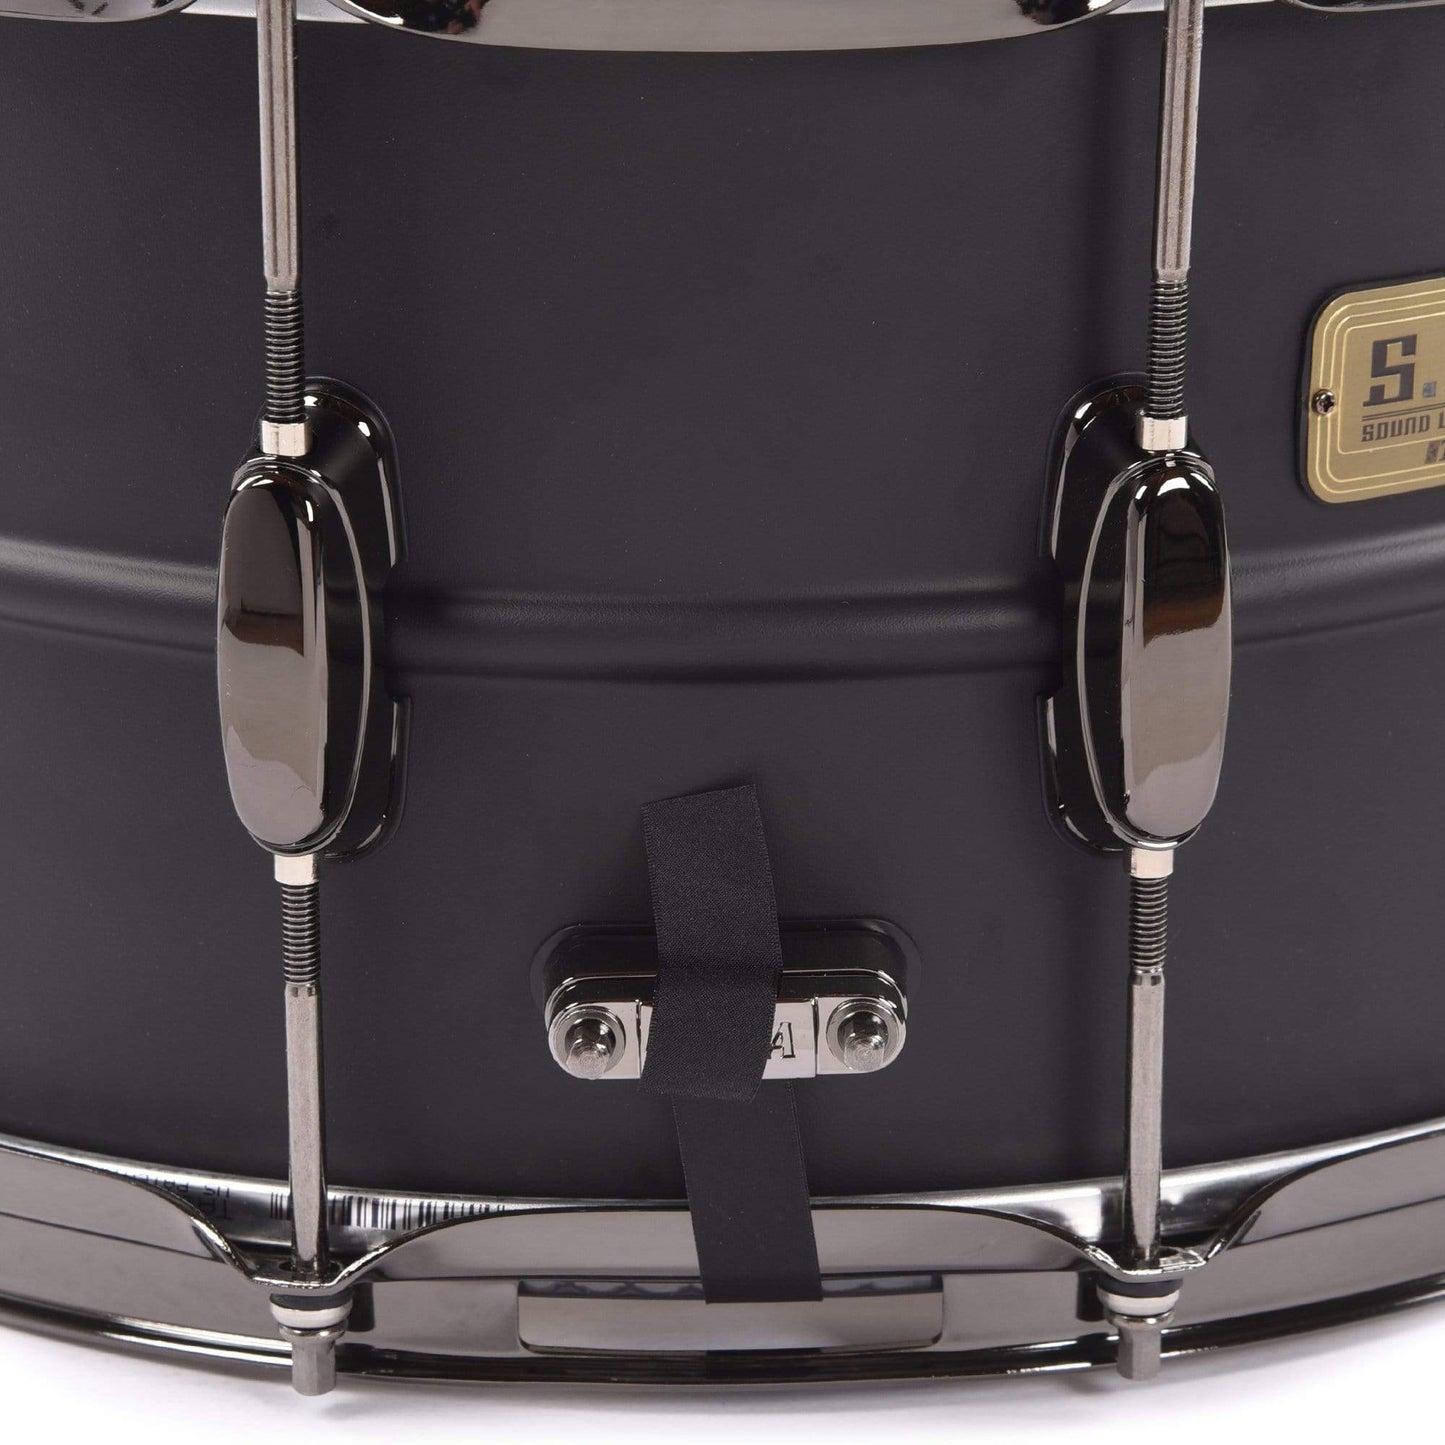 Tama 8x14 S.L.P. Big Black Steel Snare Drum Limited Edition Drums and Percussion / Acoustic Drums / Snare